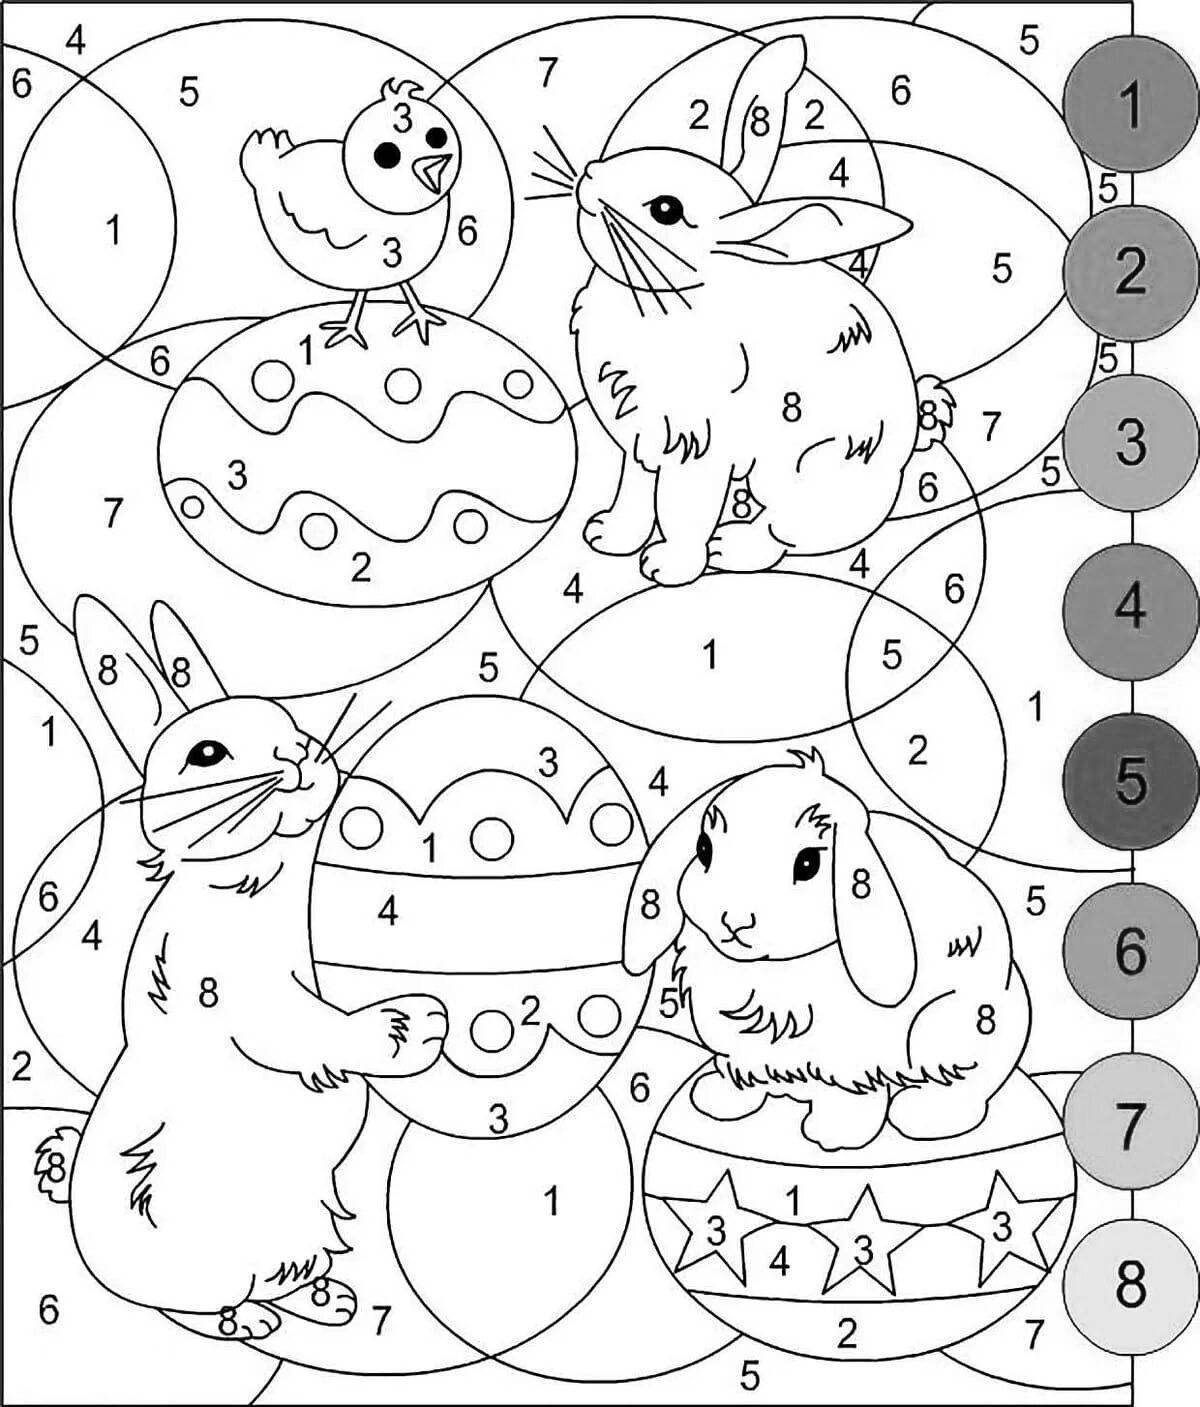 Creative coloring pages for 7 year olds